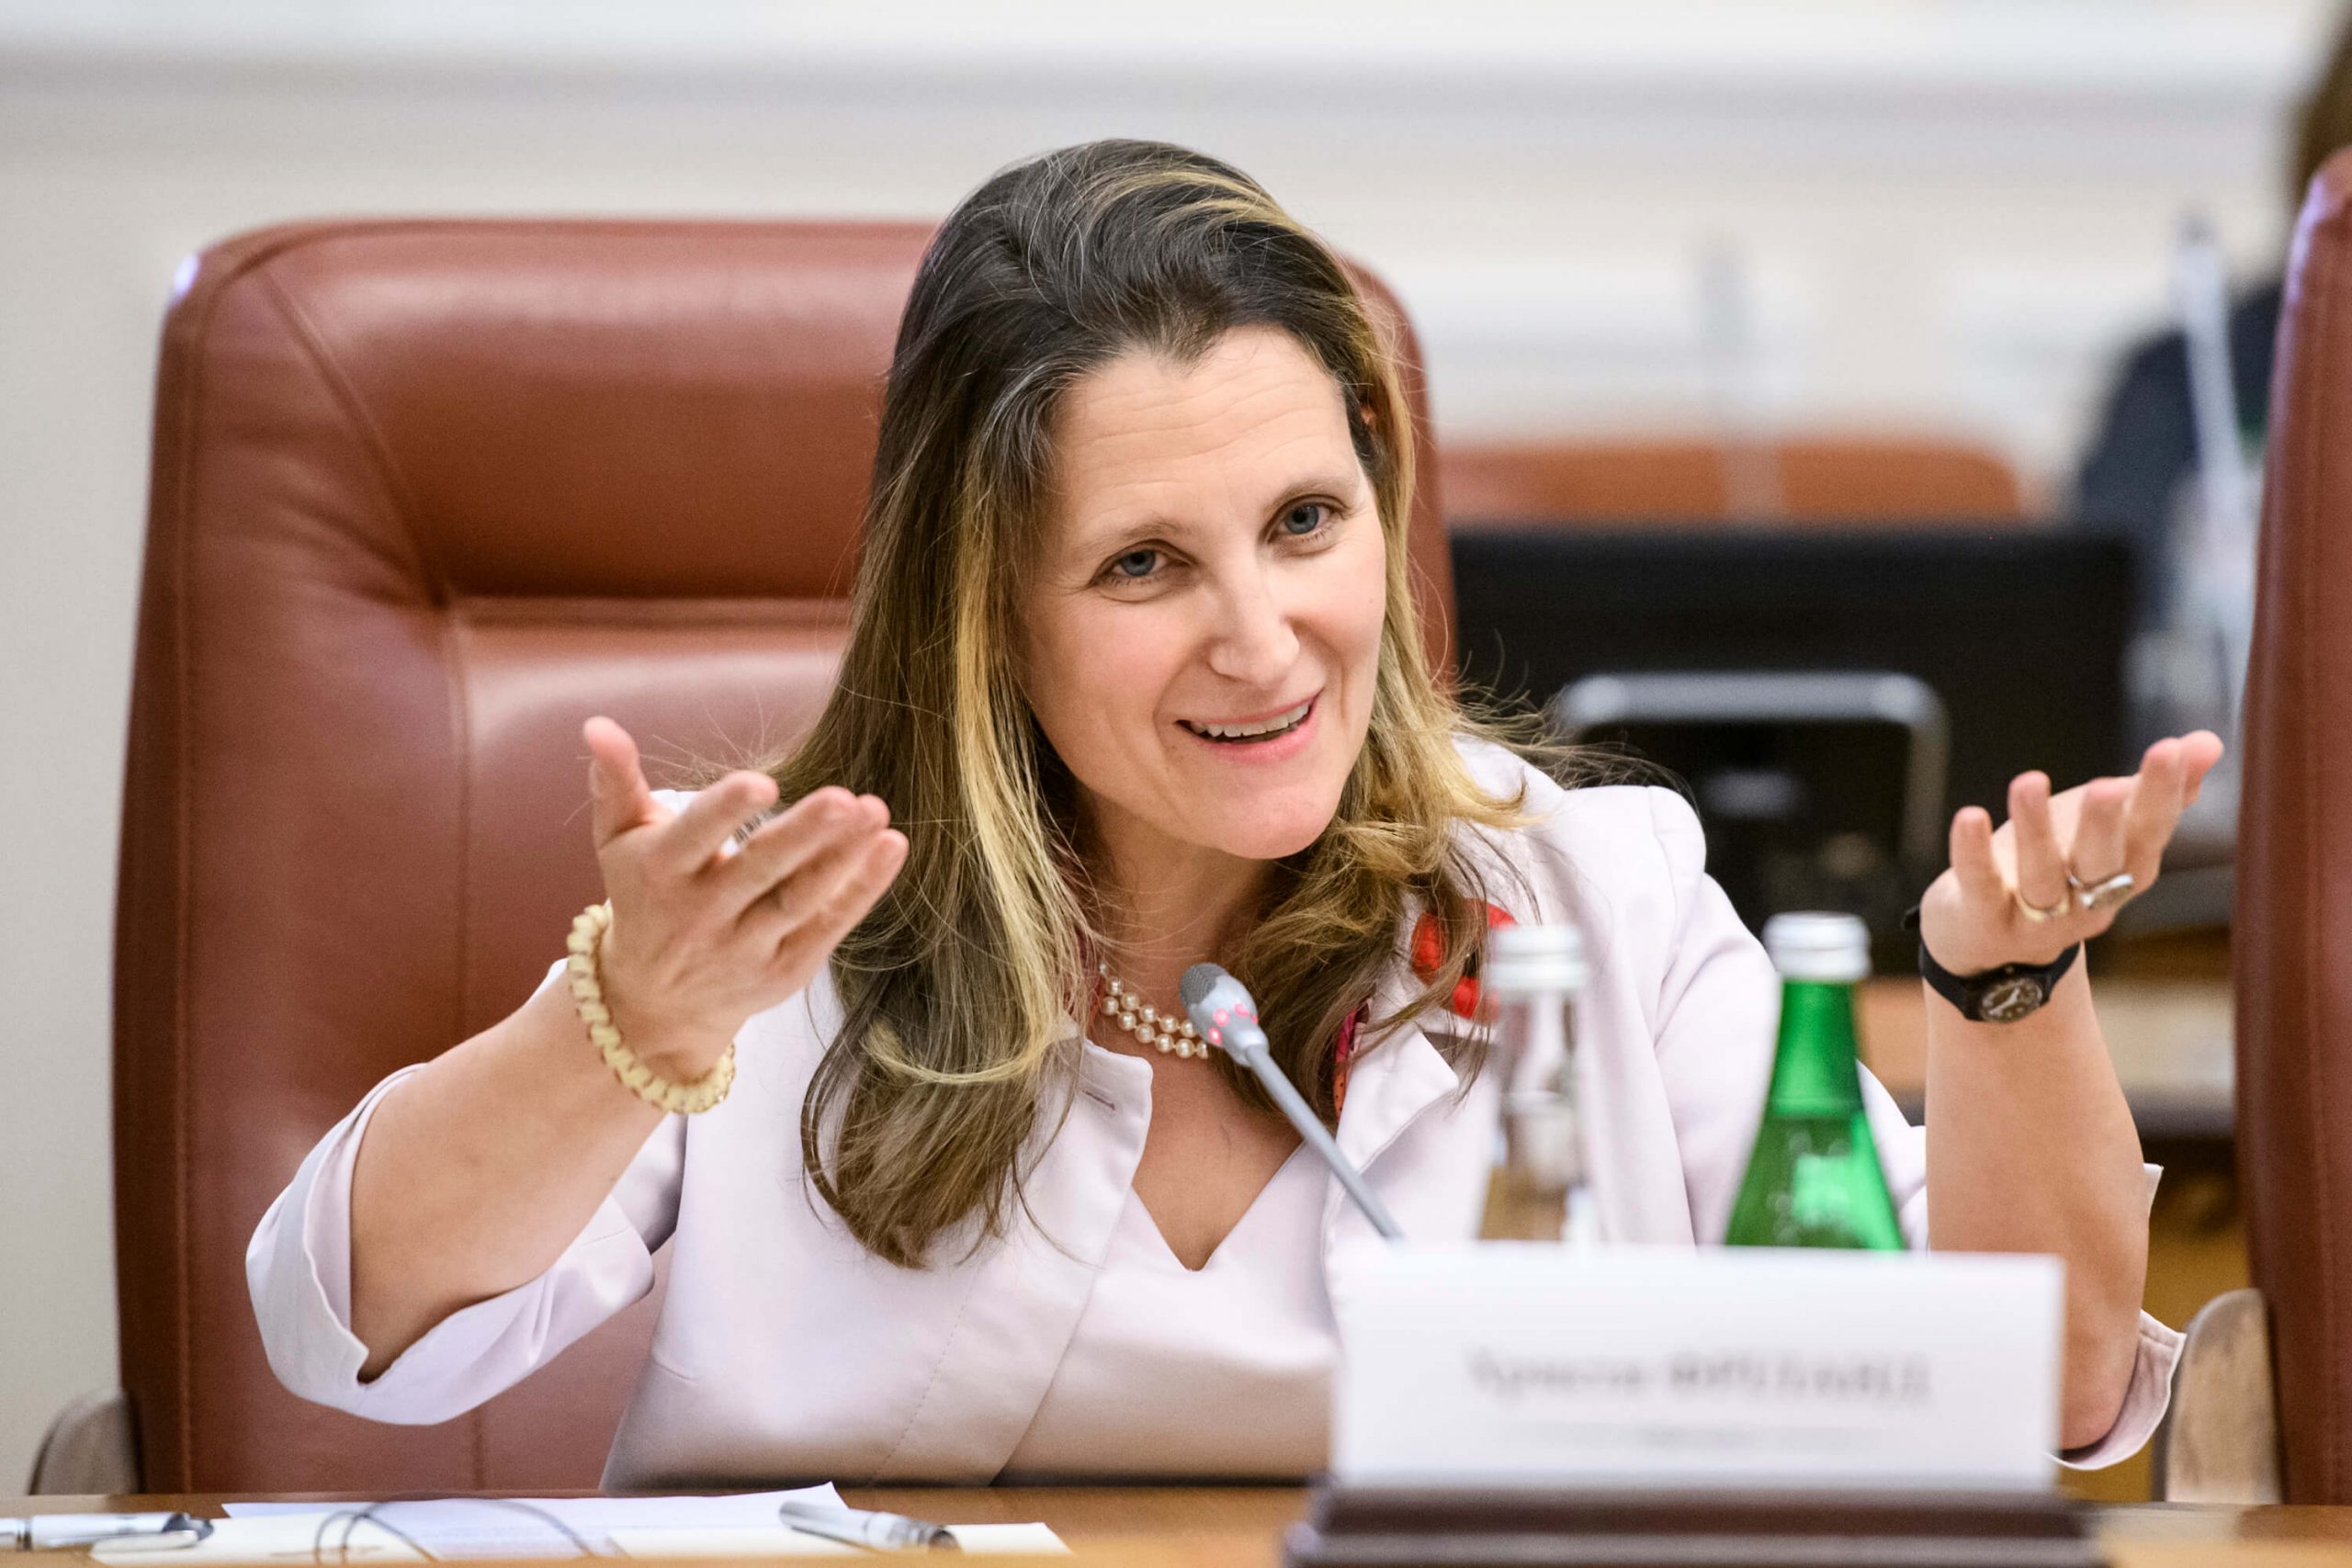 Chrystia Freeland in 2019, then Minister for Foreign Affairs of Canada 